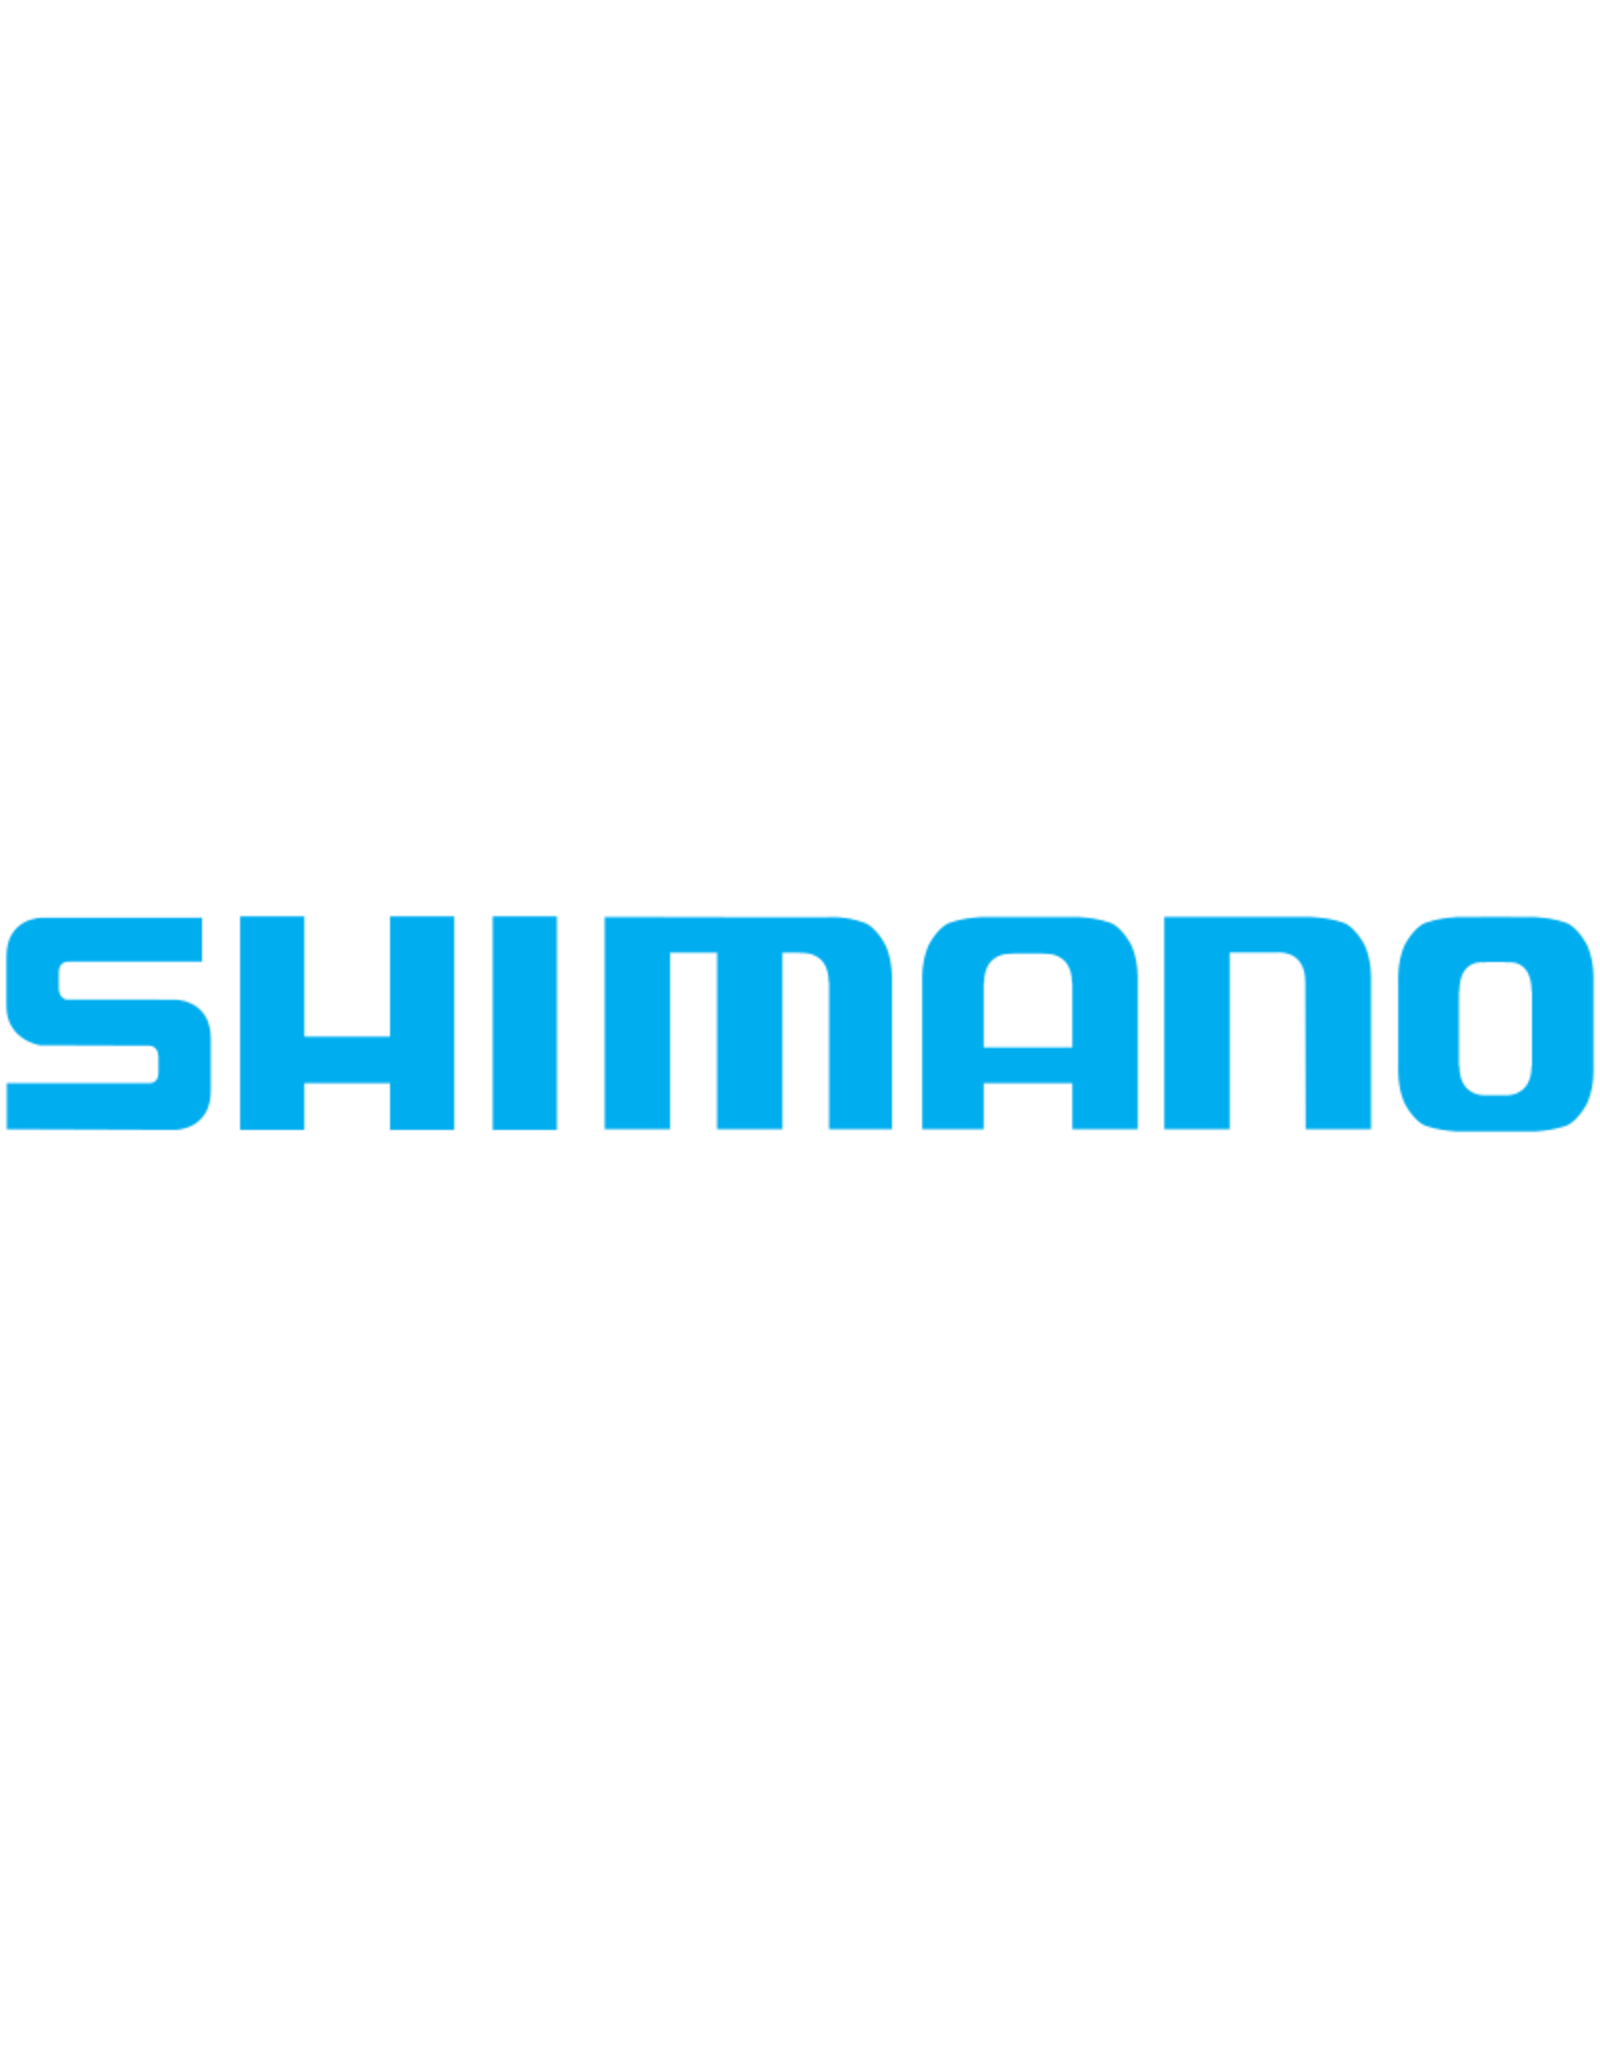 Shimano RD15127  HANDLE ASSEMBLY